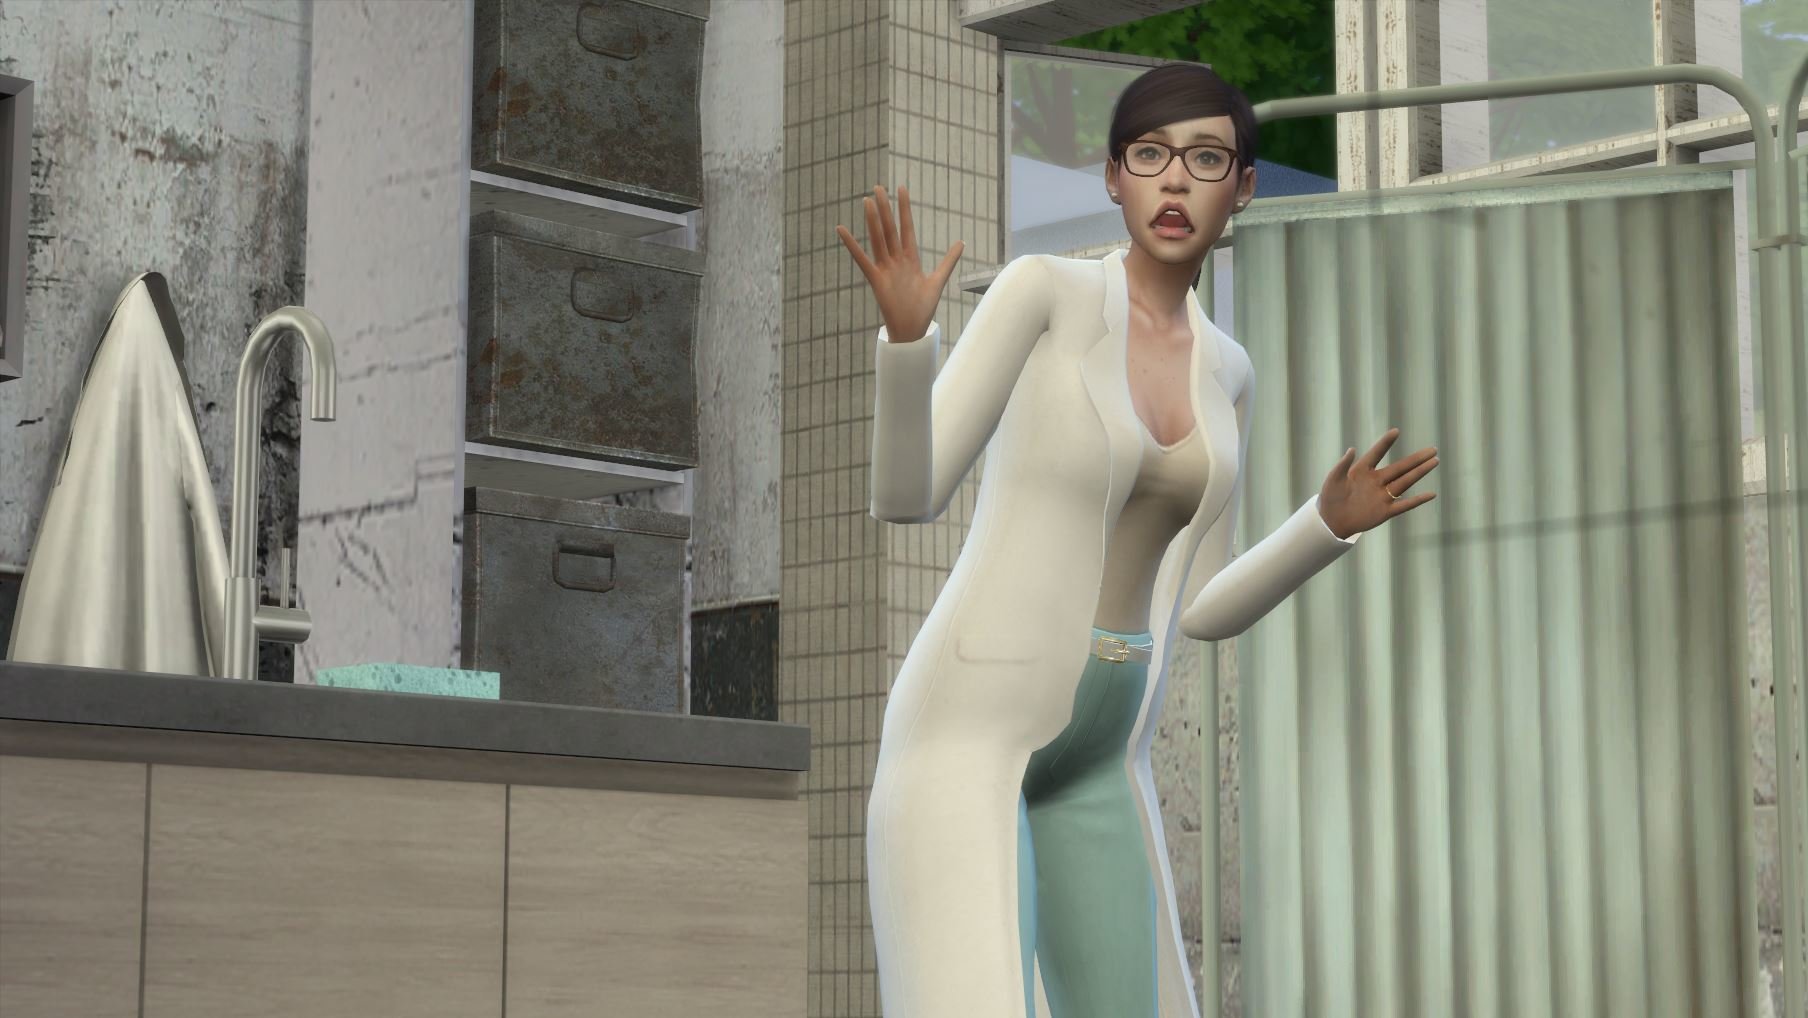 Hot Stories Of My Sims Page 29 The Sims 4 General Discussion 